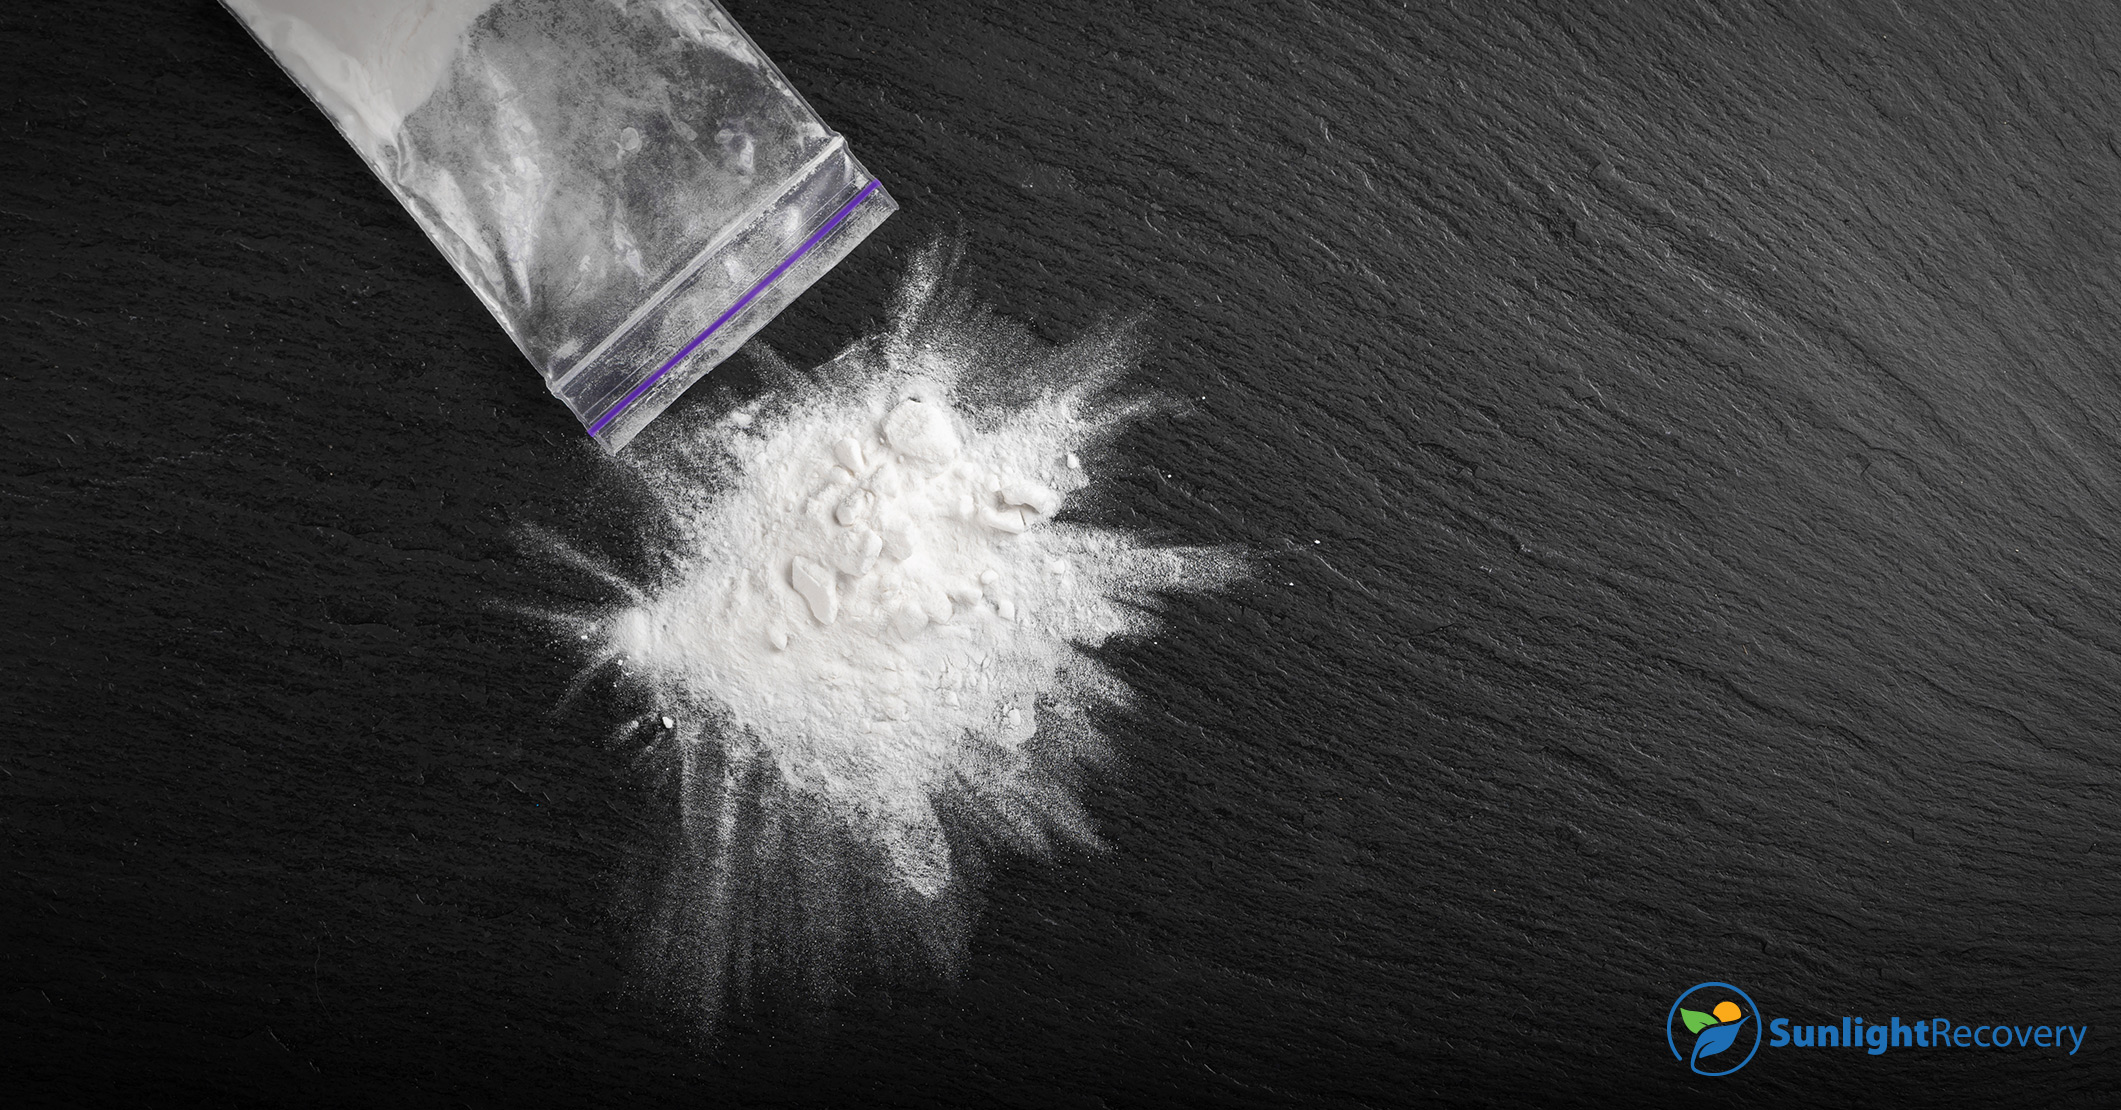 Can You Overdose on Cocaine?